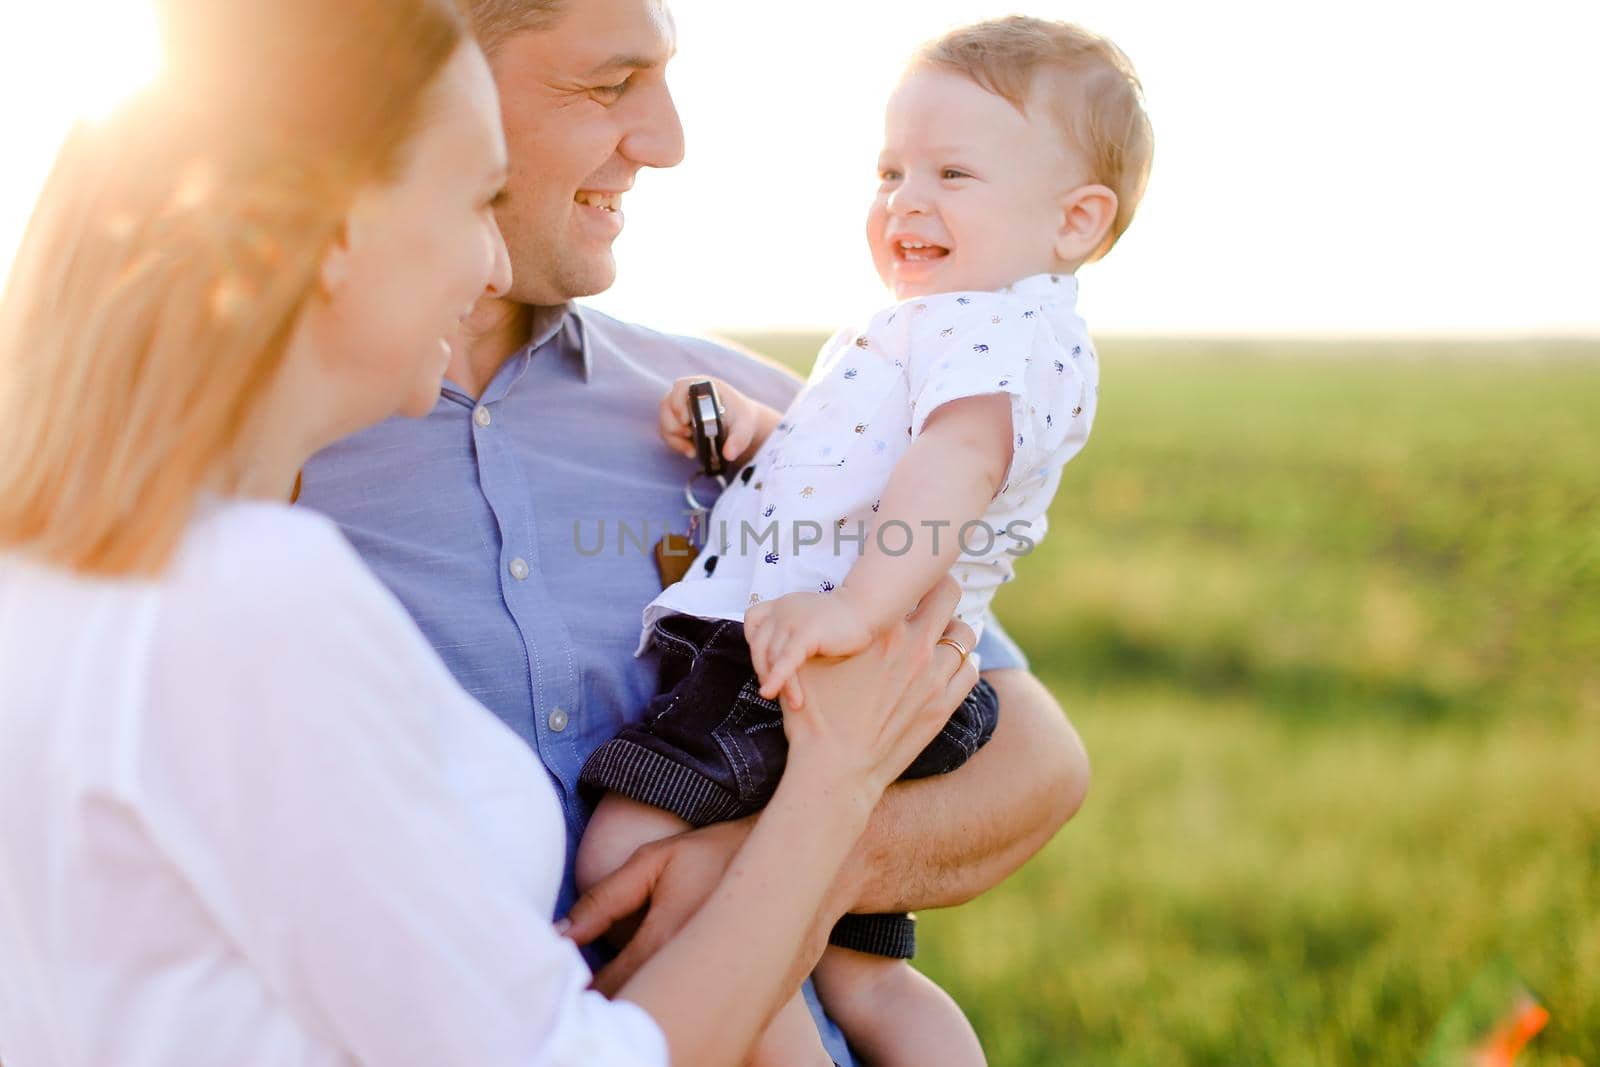 Young mother and father holding baby, grass in background. Concept of nature and parenthood.